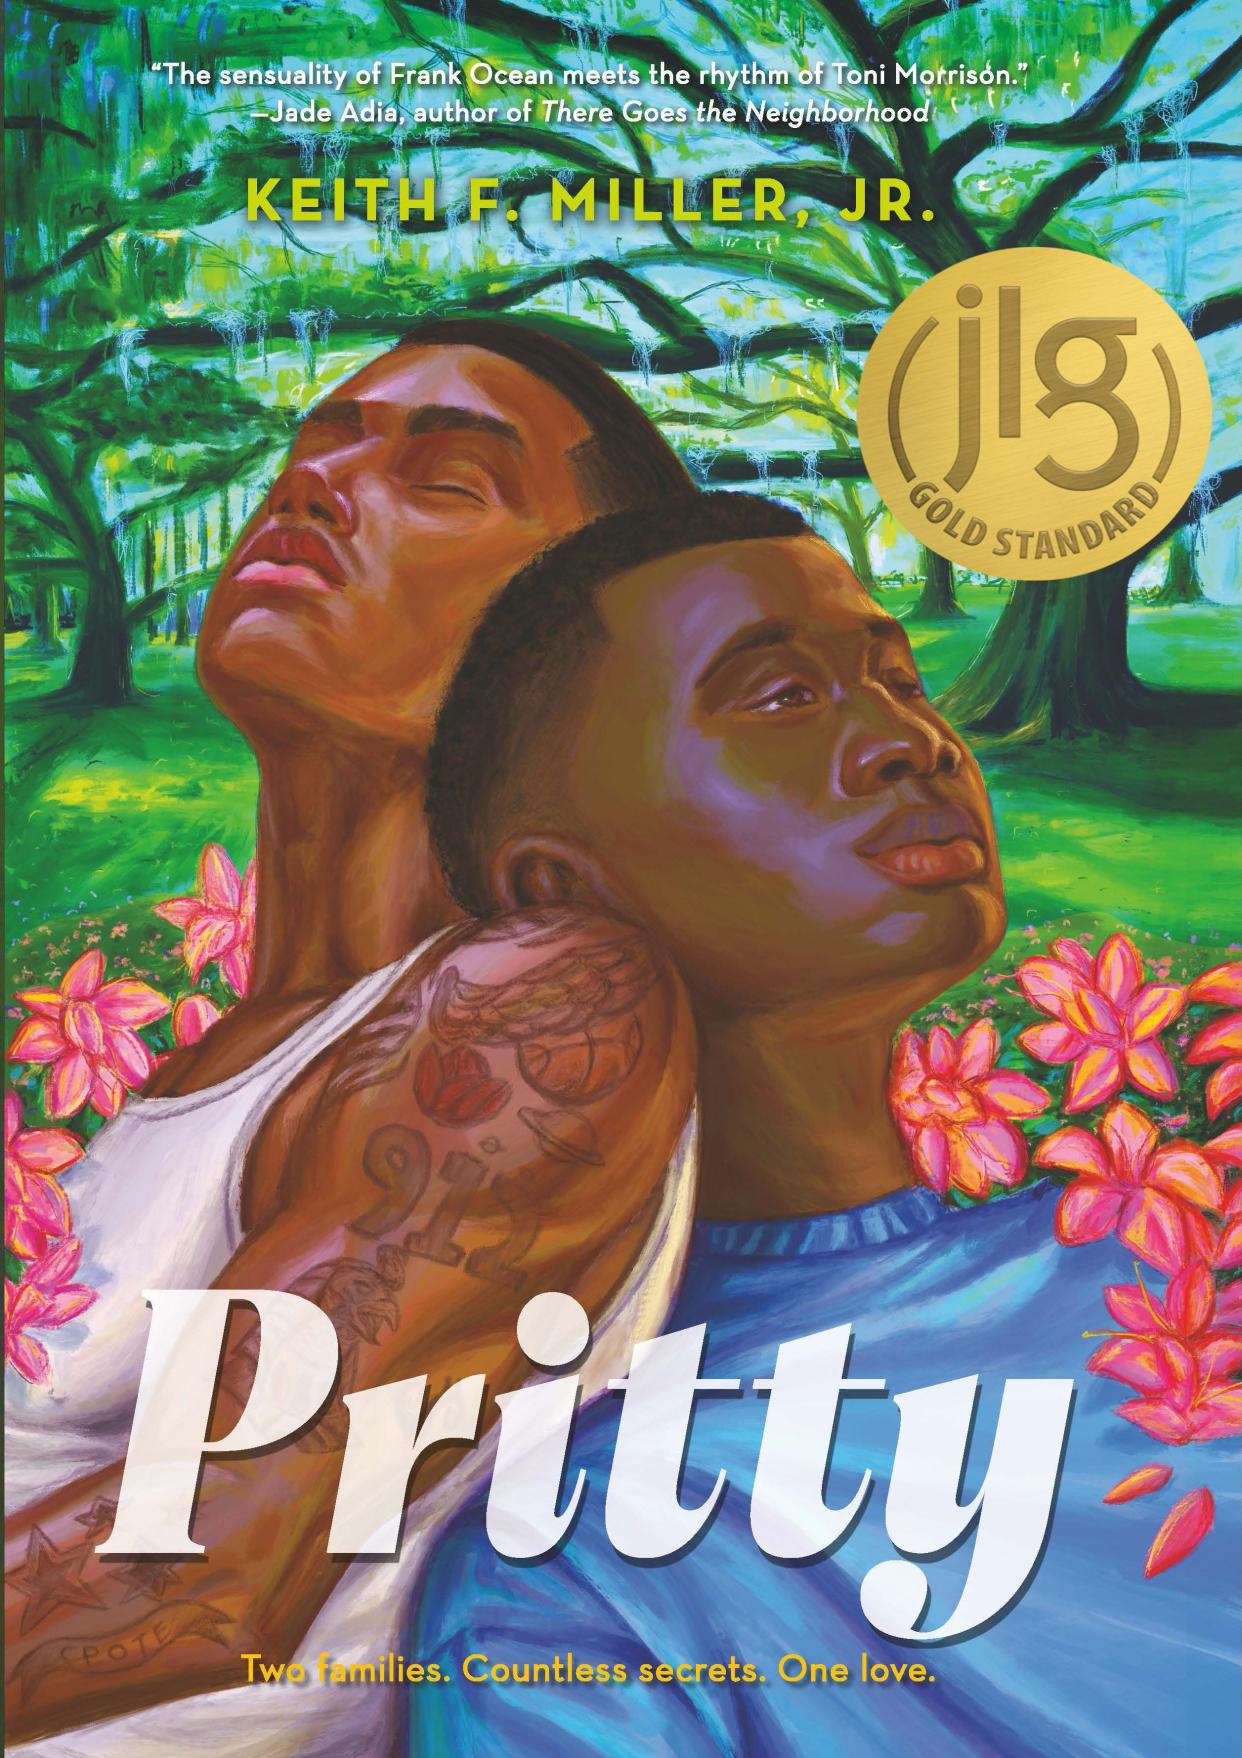 Keith F. Miller's debut novel, "Pritty" tells the story of young Black men coming of age in Savannah amid a community conflict that could keep them from exploring their love for one another. The book was released on Tuesday Nov. 14, 2023